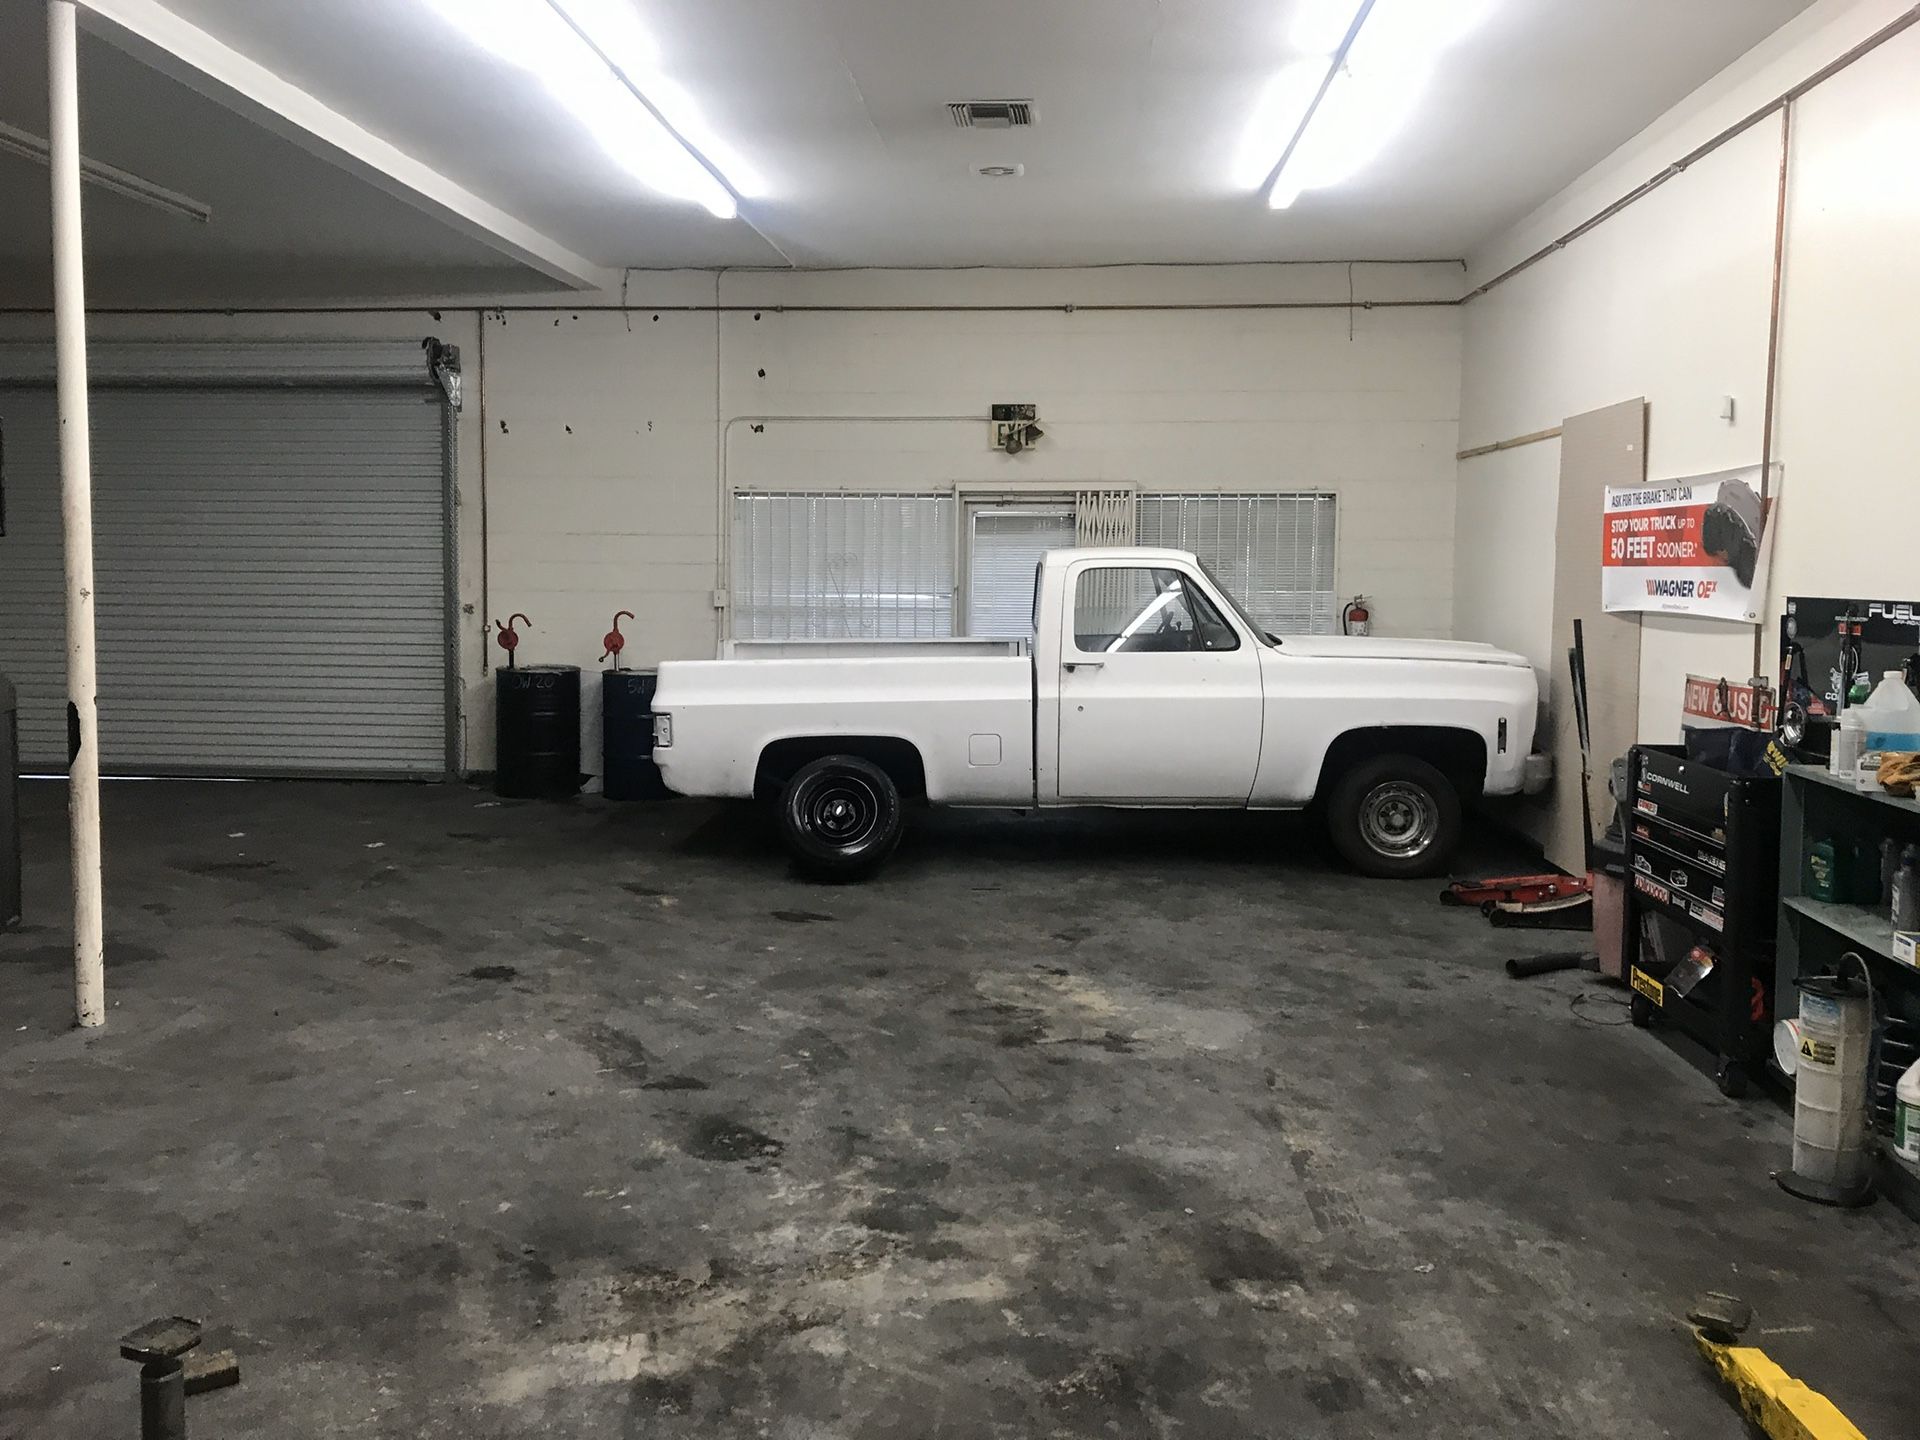 1979 c10 short bed shell and LS 6.0 not running send me a offer